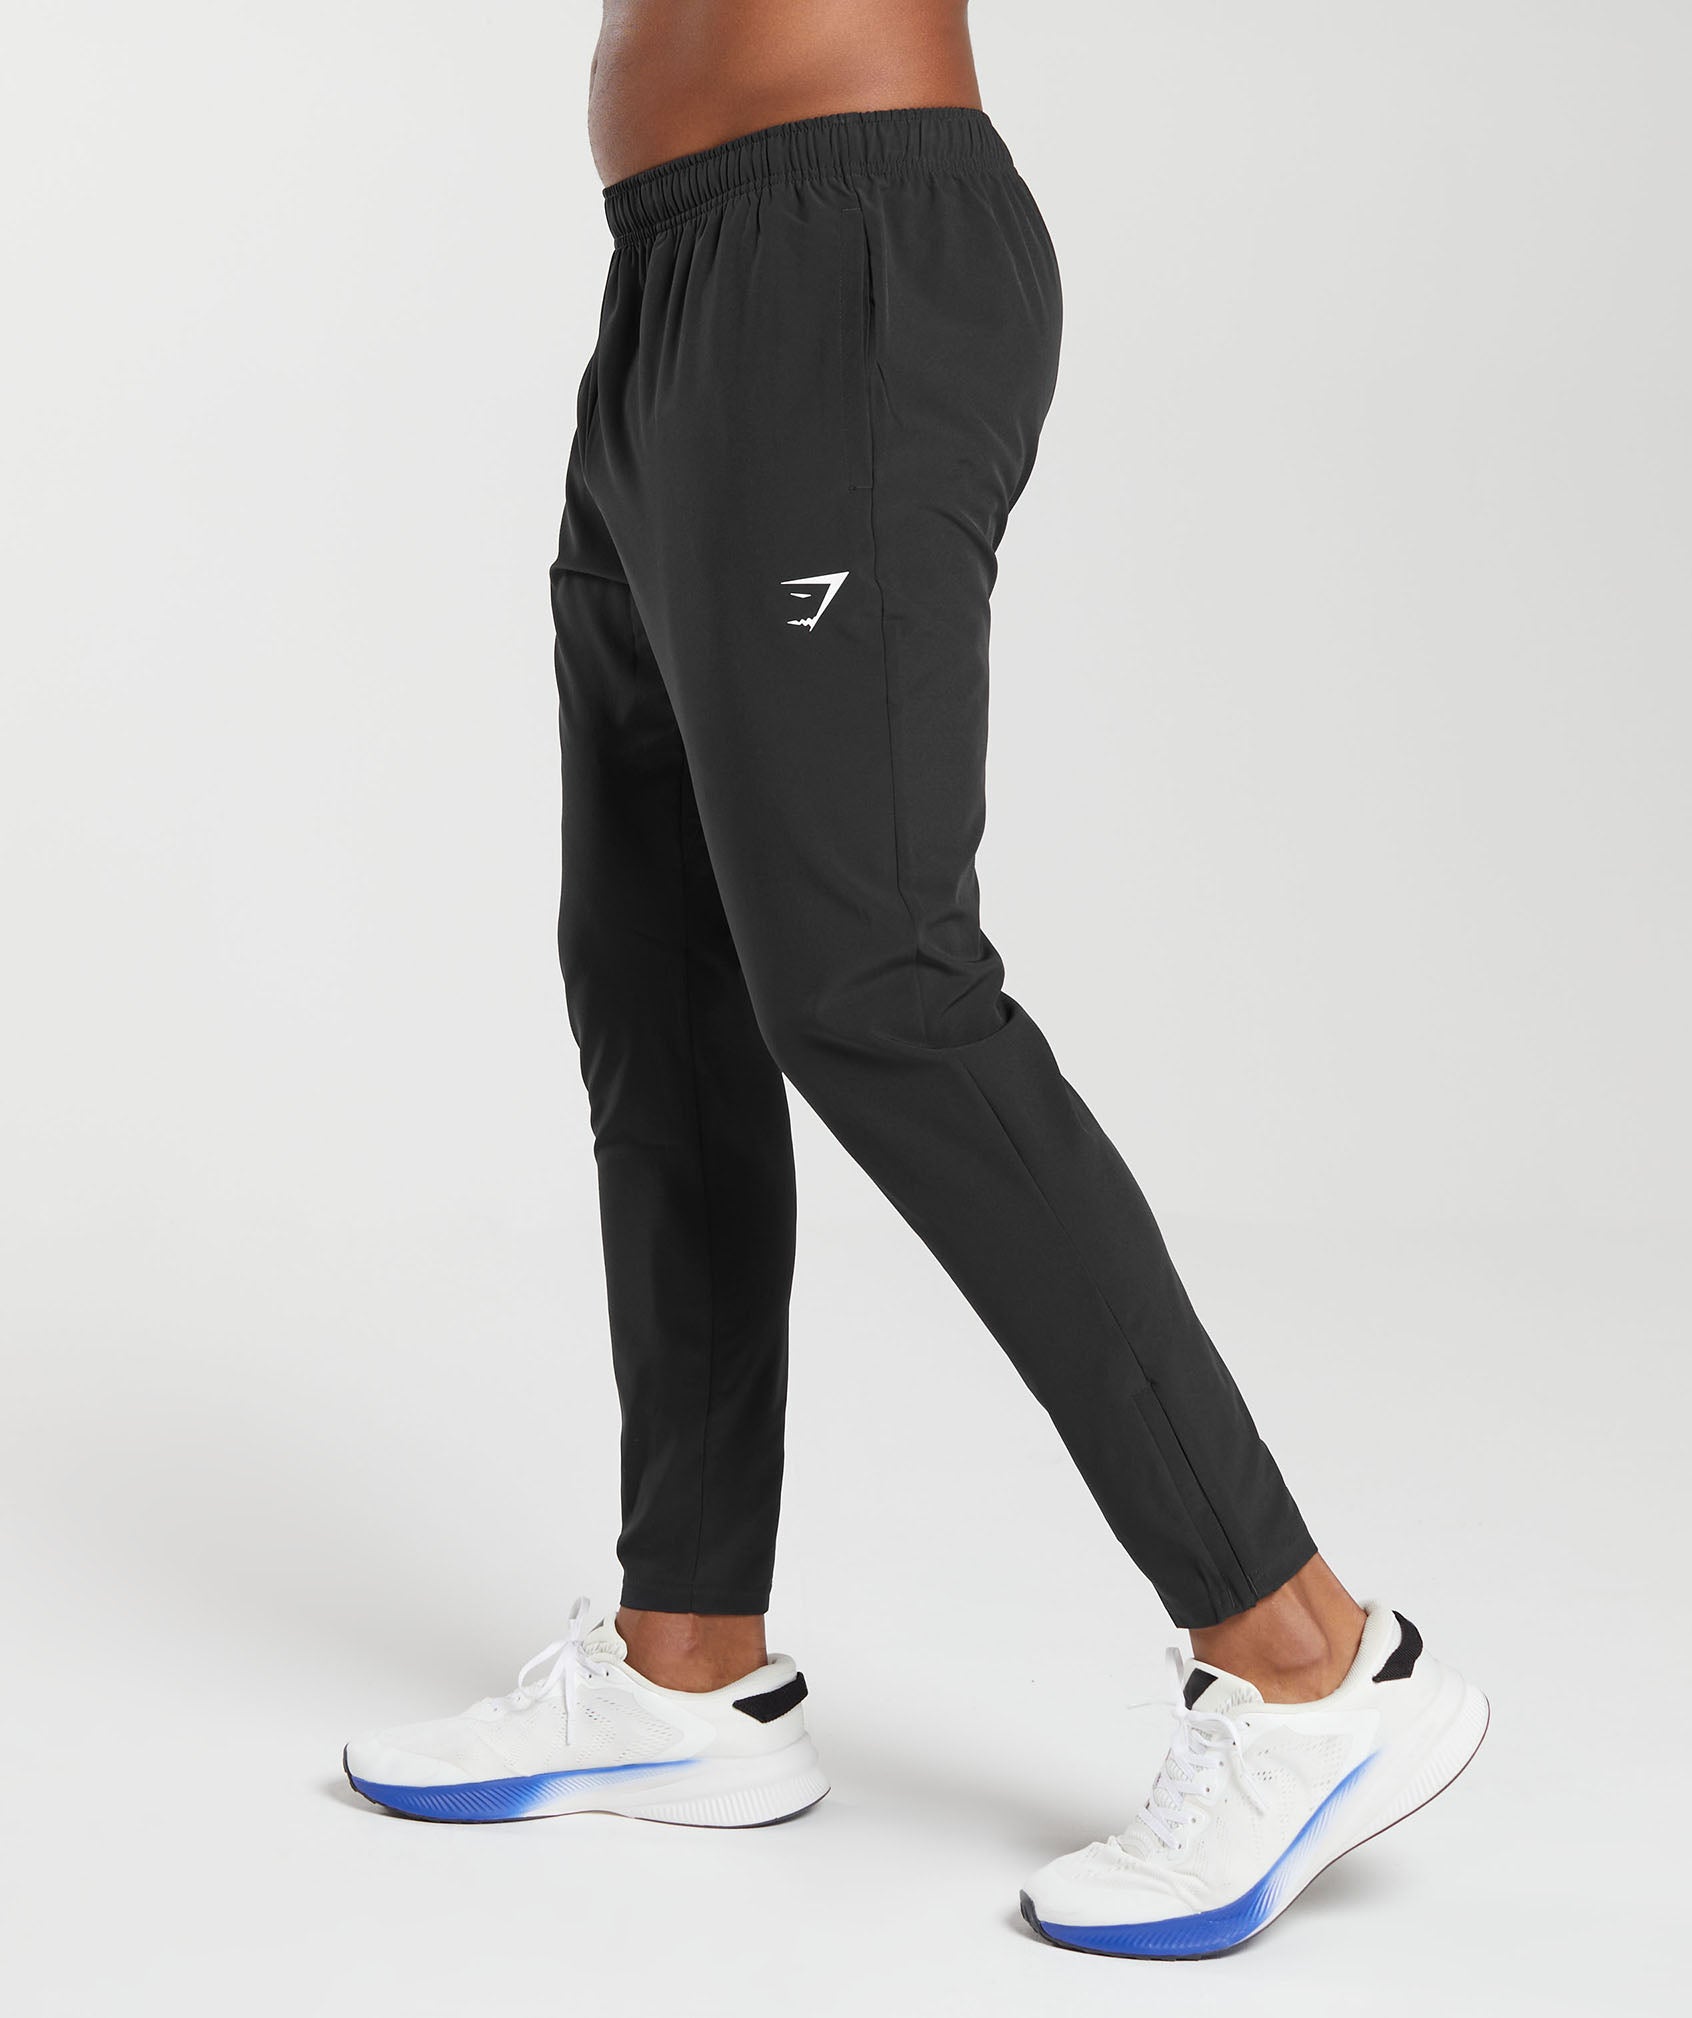 Arrival Woven Joggers in Black - view 3